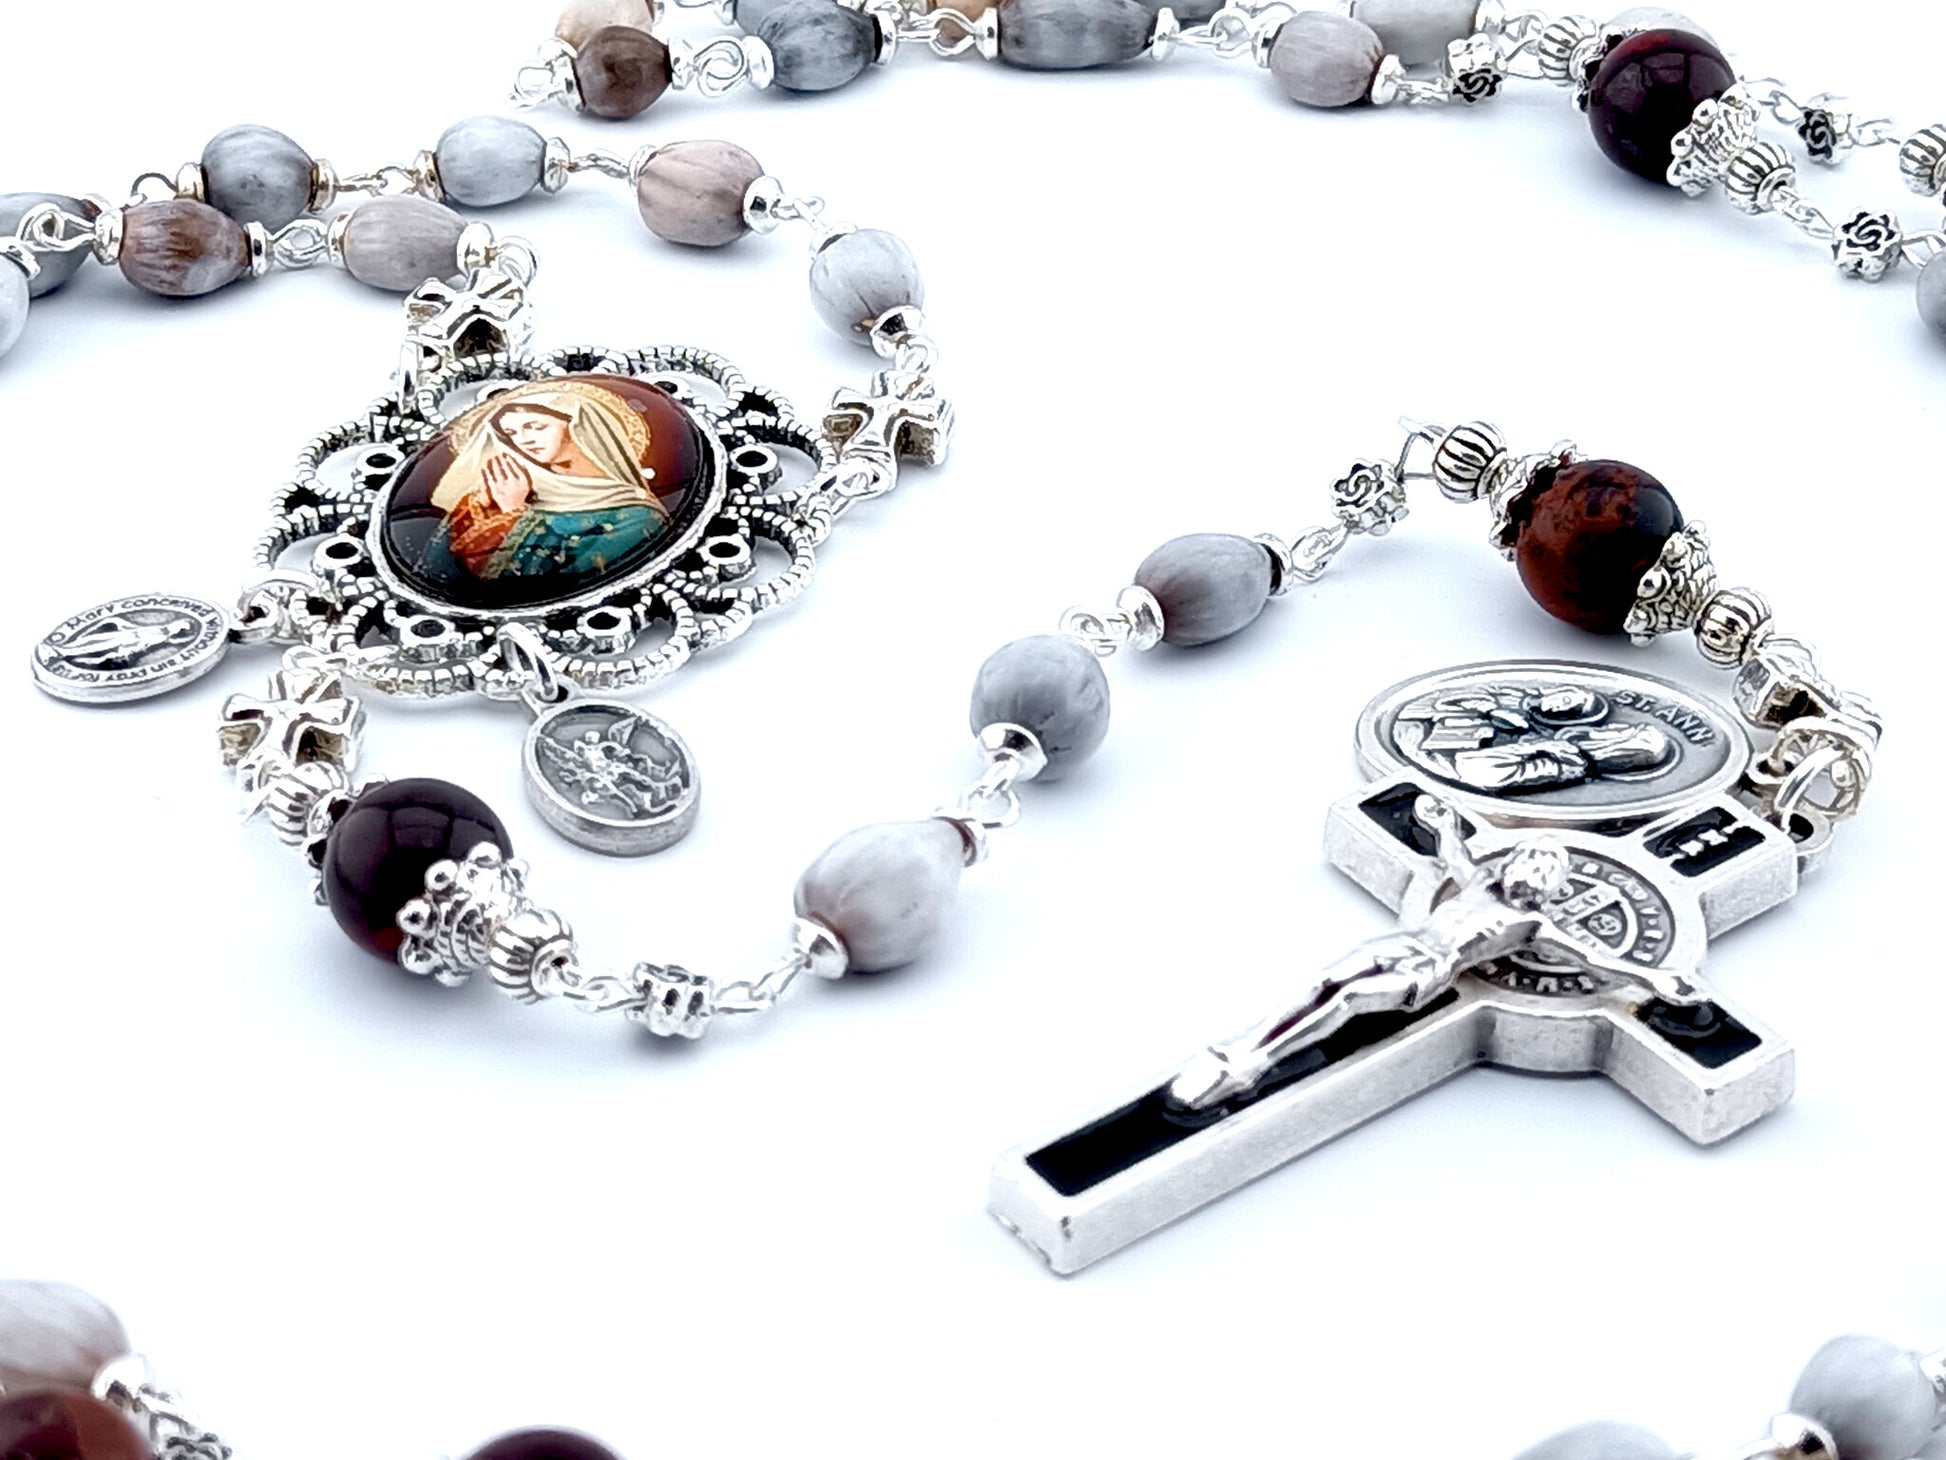 Our Lady of Grace unique rosary beads with Job's Tears and dark red jasper gemstone bead, black enamel Saint Benedict crucifix and picture centre medal.